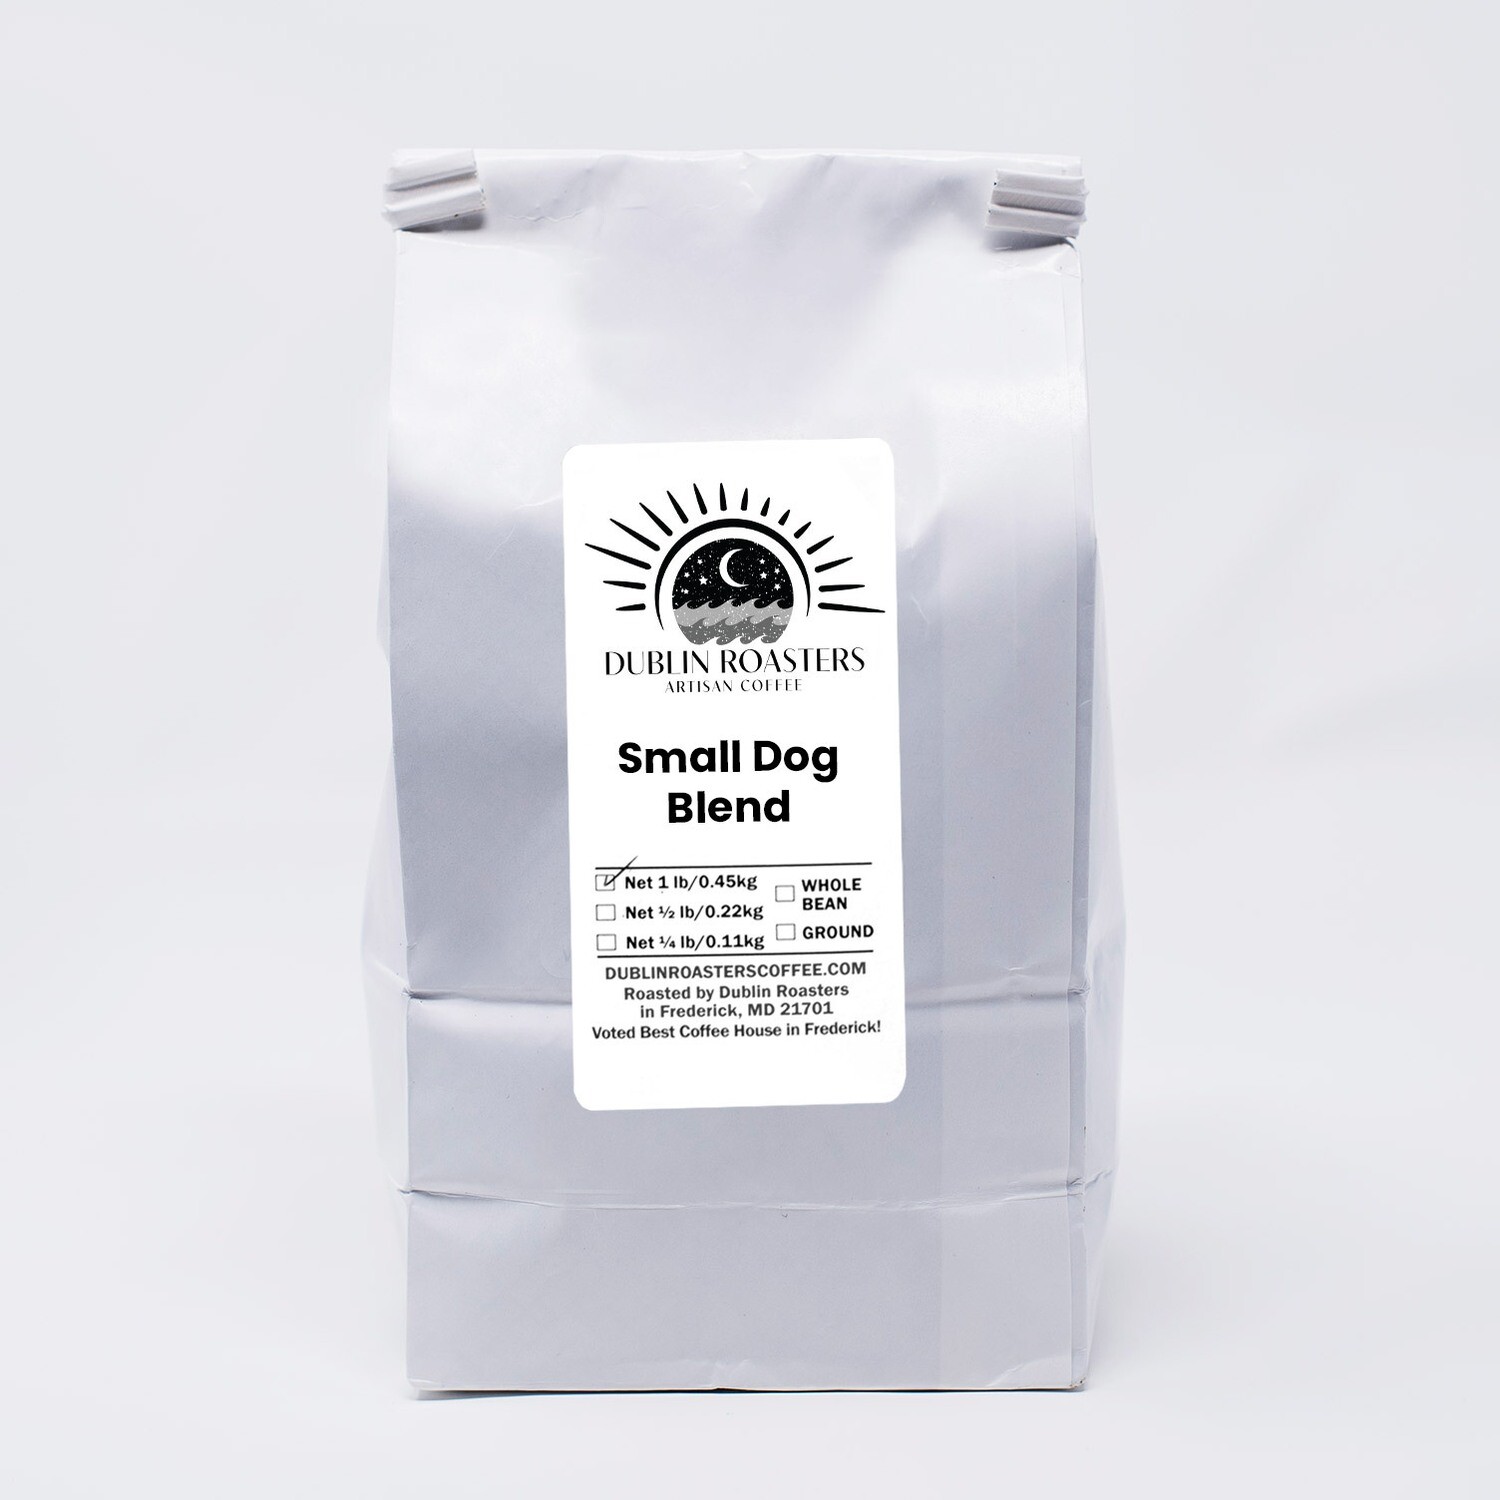 Small Dog Blend